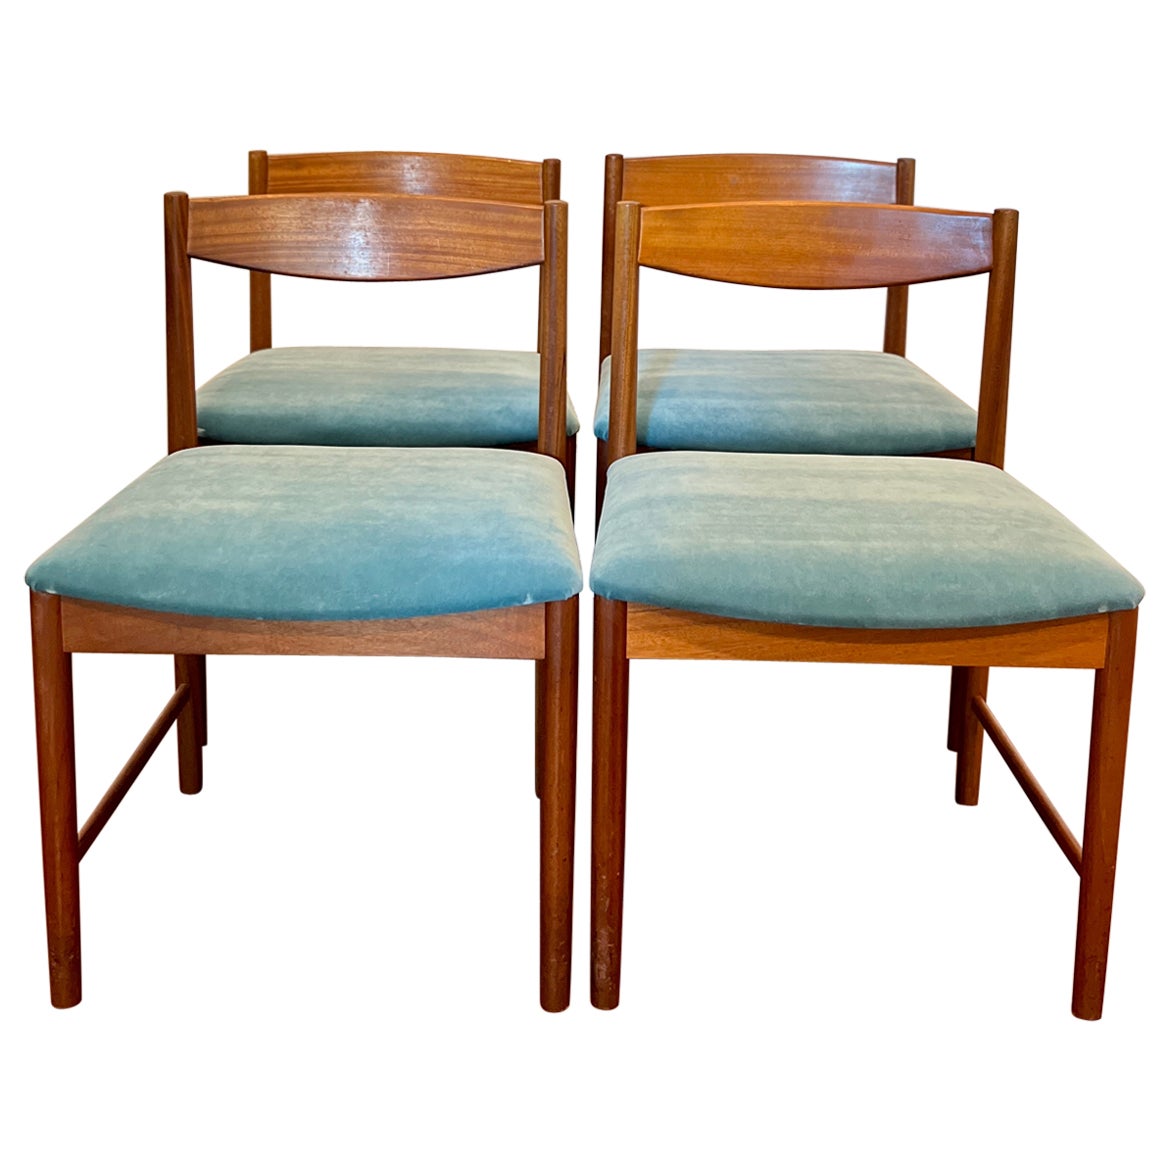 A set of four teak dining chairs by Tom Robertson for A.H McIntosh blue velvet